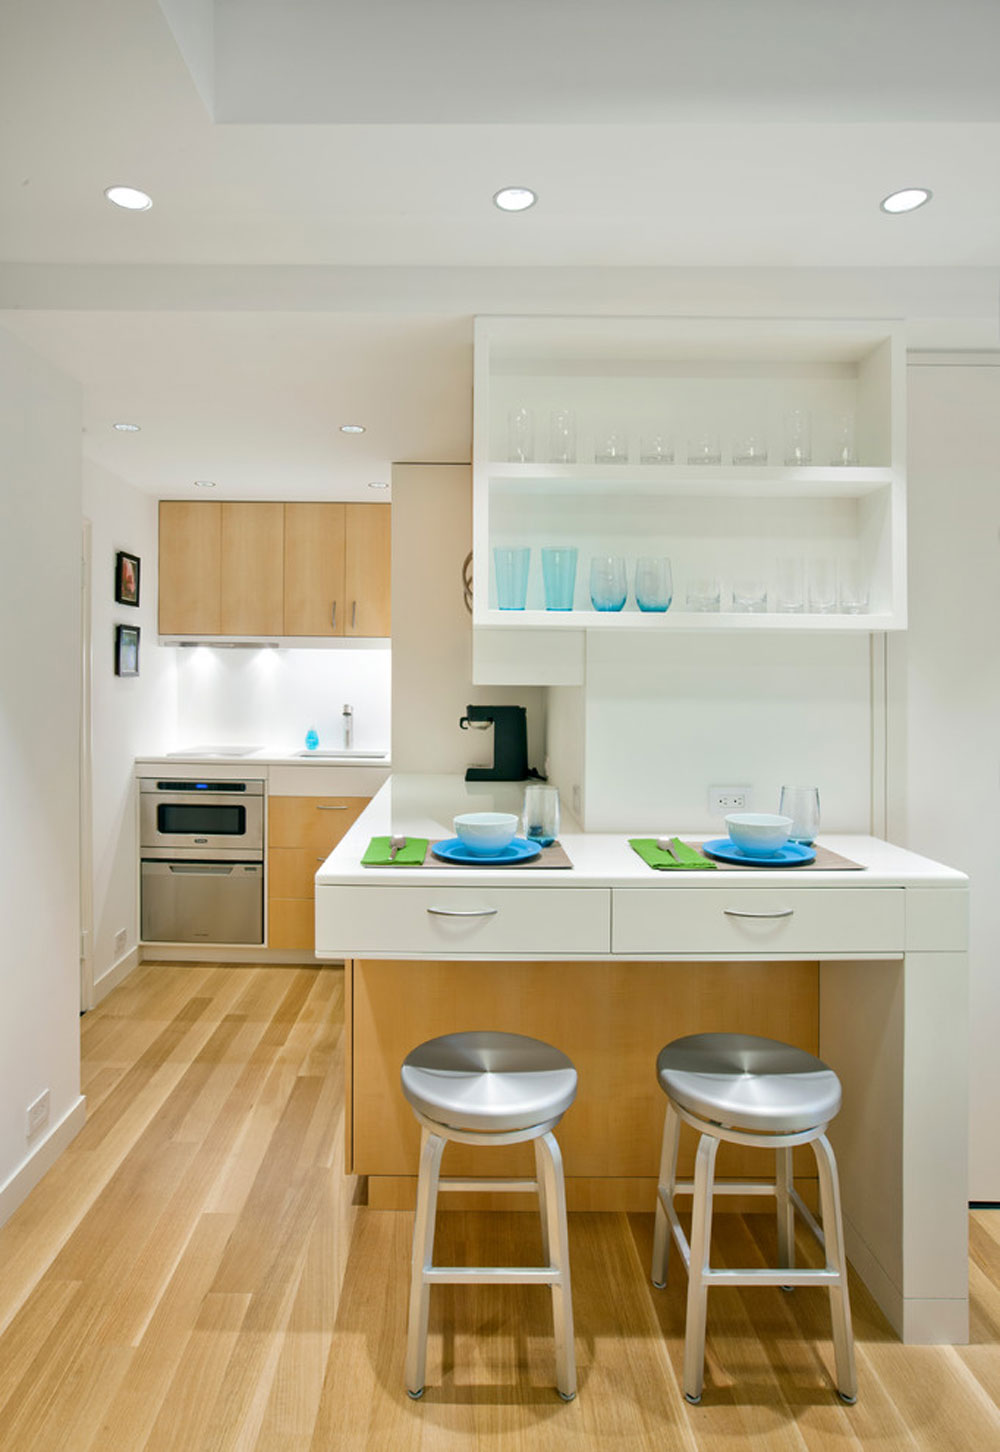 Micro-apartment-by-AllenKillcoyne-Architects-1 How to organize and decorate a small apartment kitchen